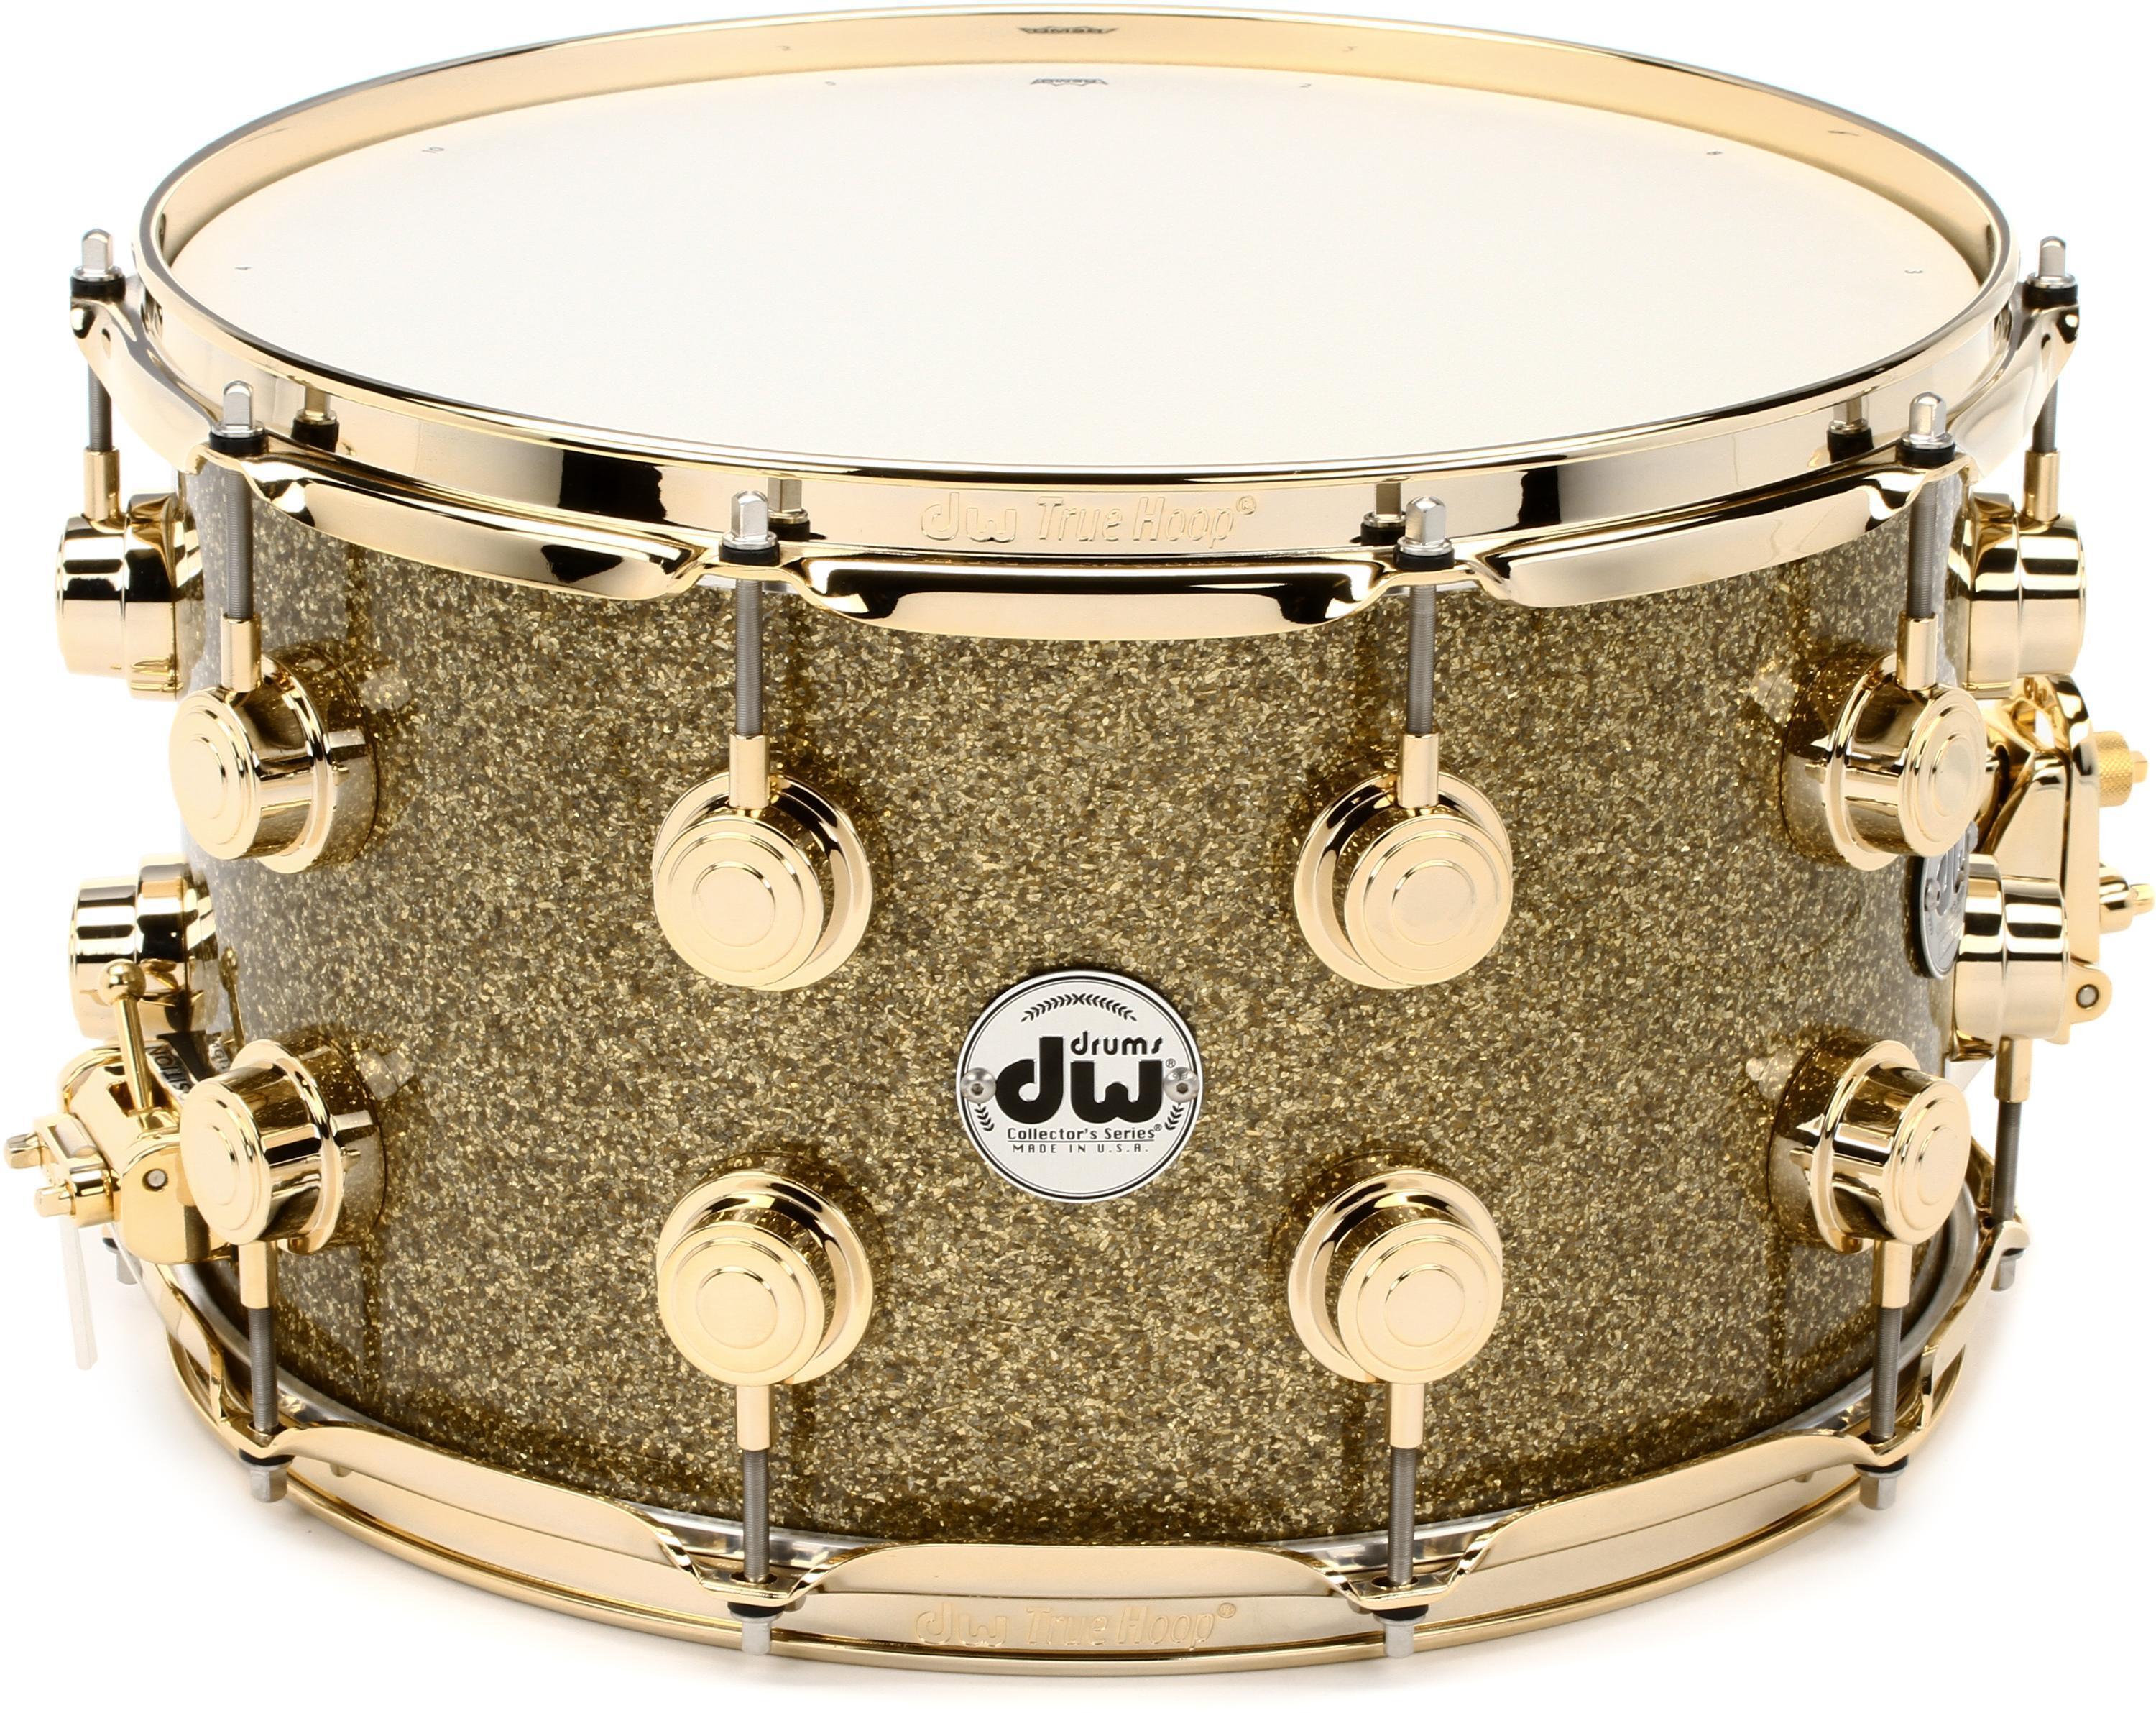 FinishPly 8 | Hardware Drum with Glass Series Snare Collector\'s Sweetwater Gold x - 14-inch, DW Gold